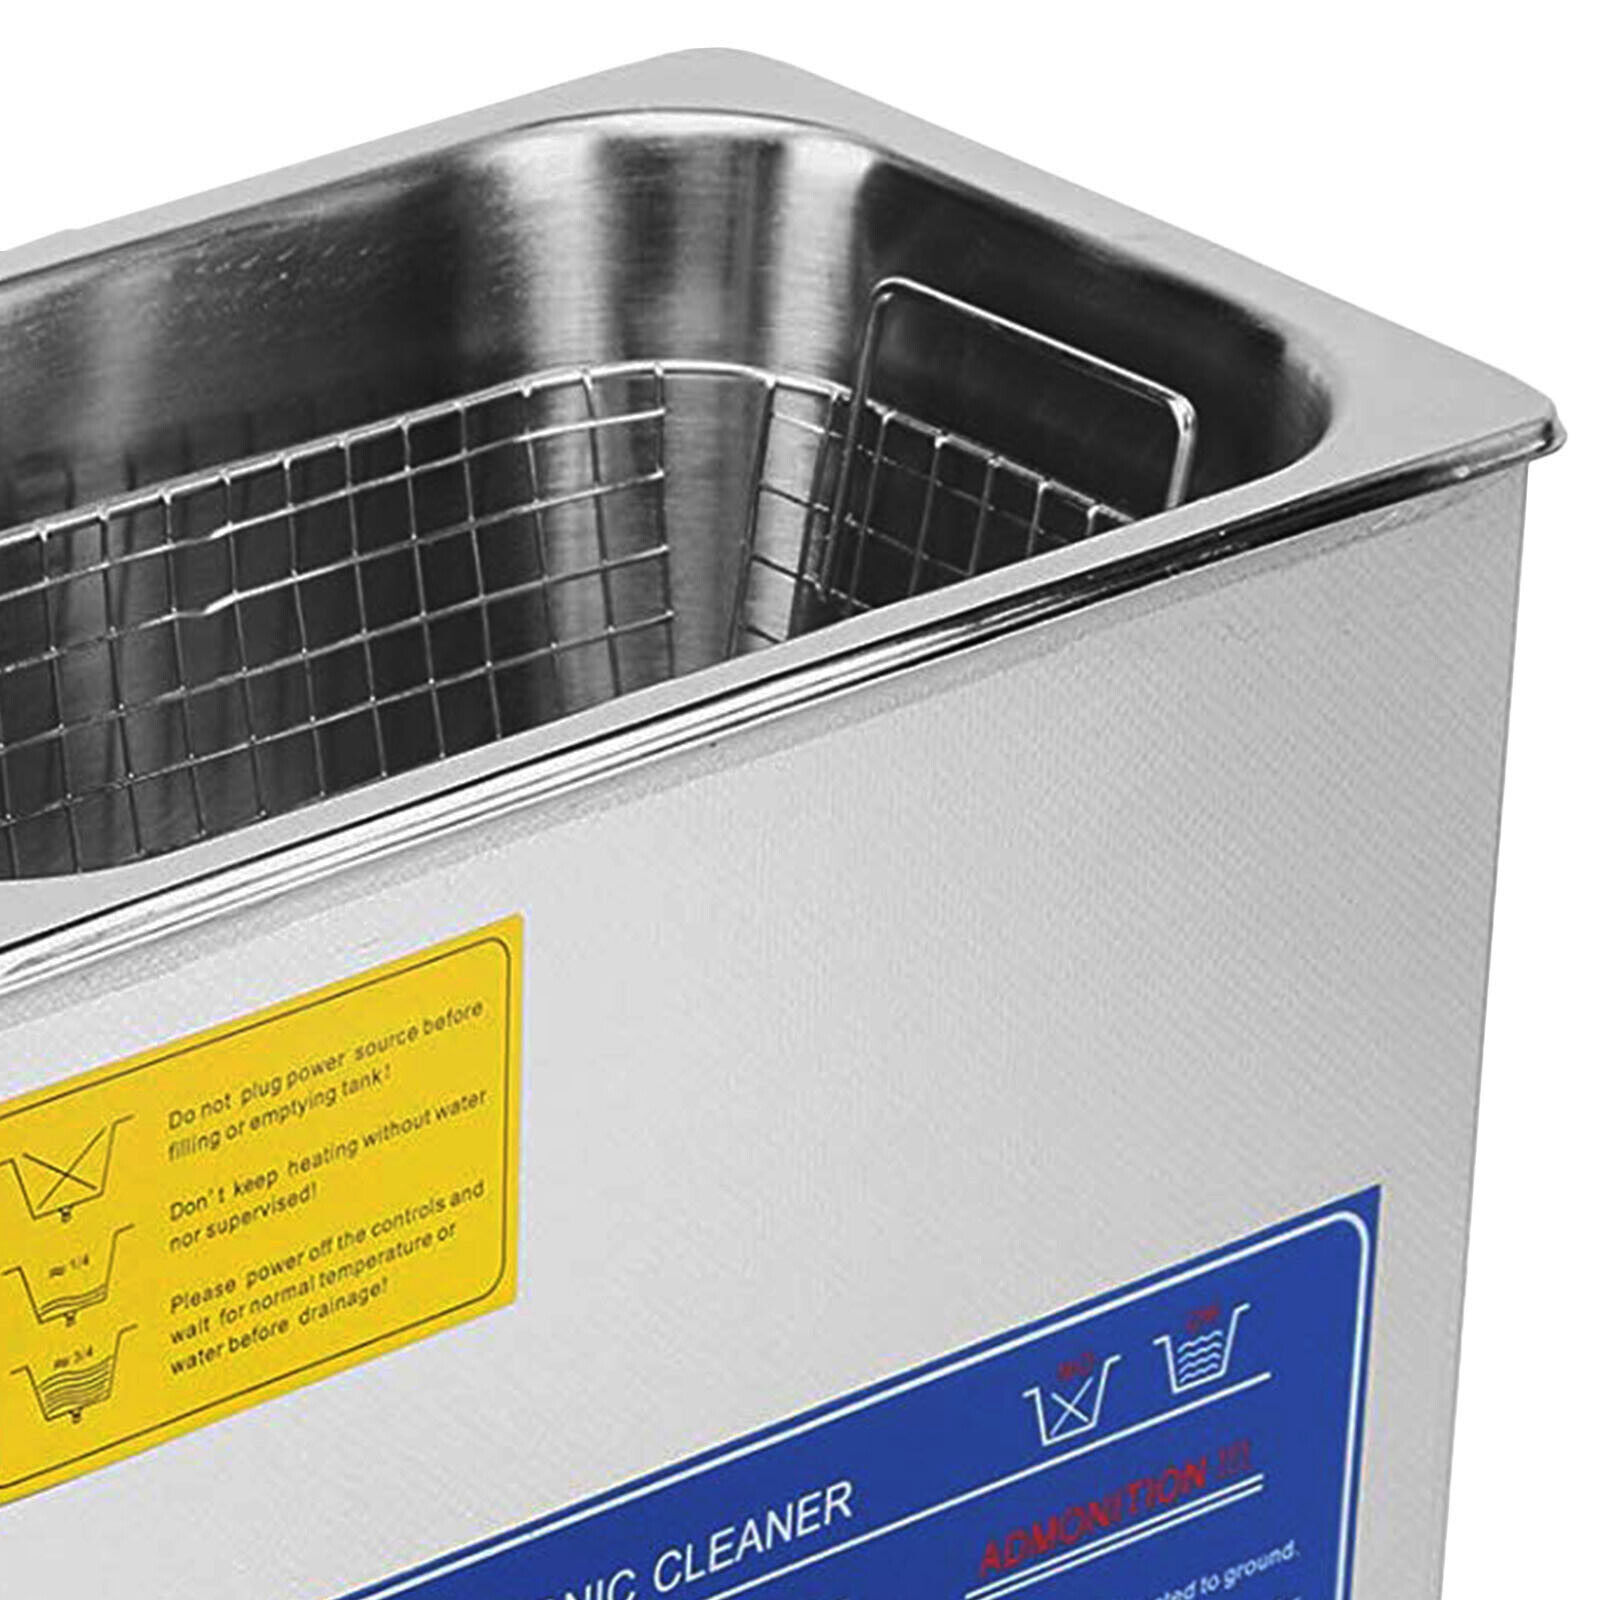 TBOND 6L Ultrasonic Cleaner with Heater & Digital Timer